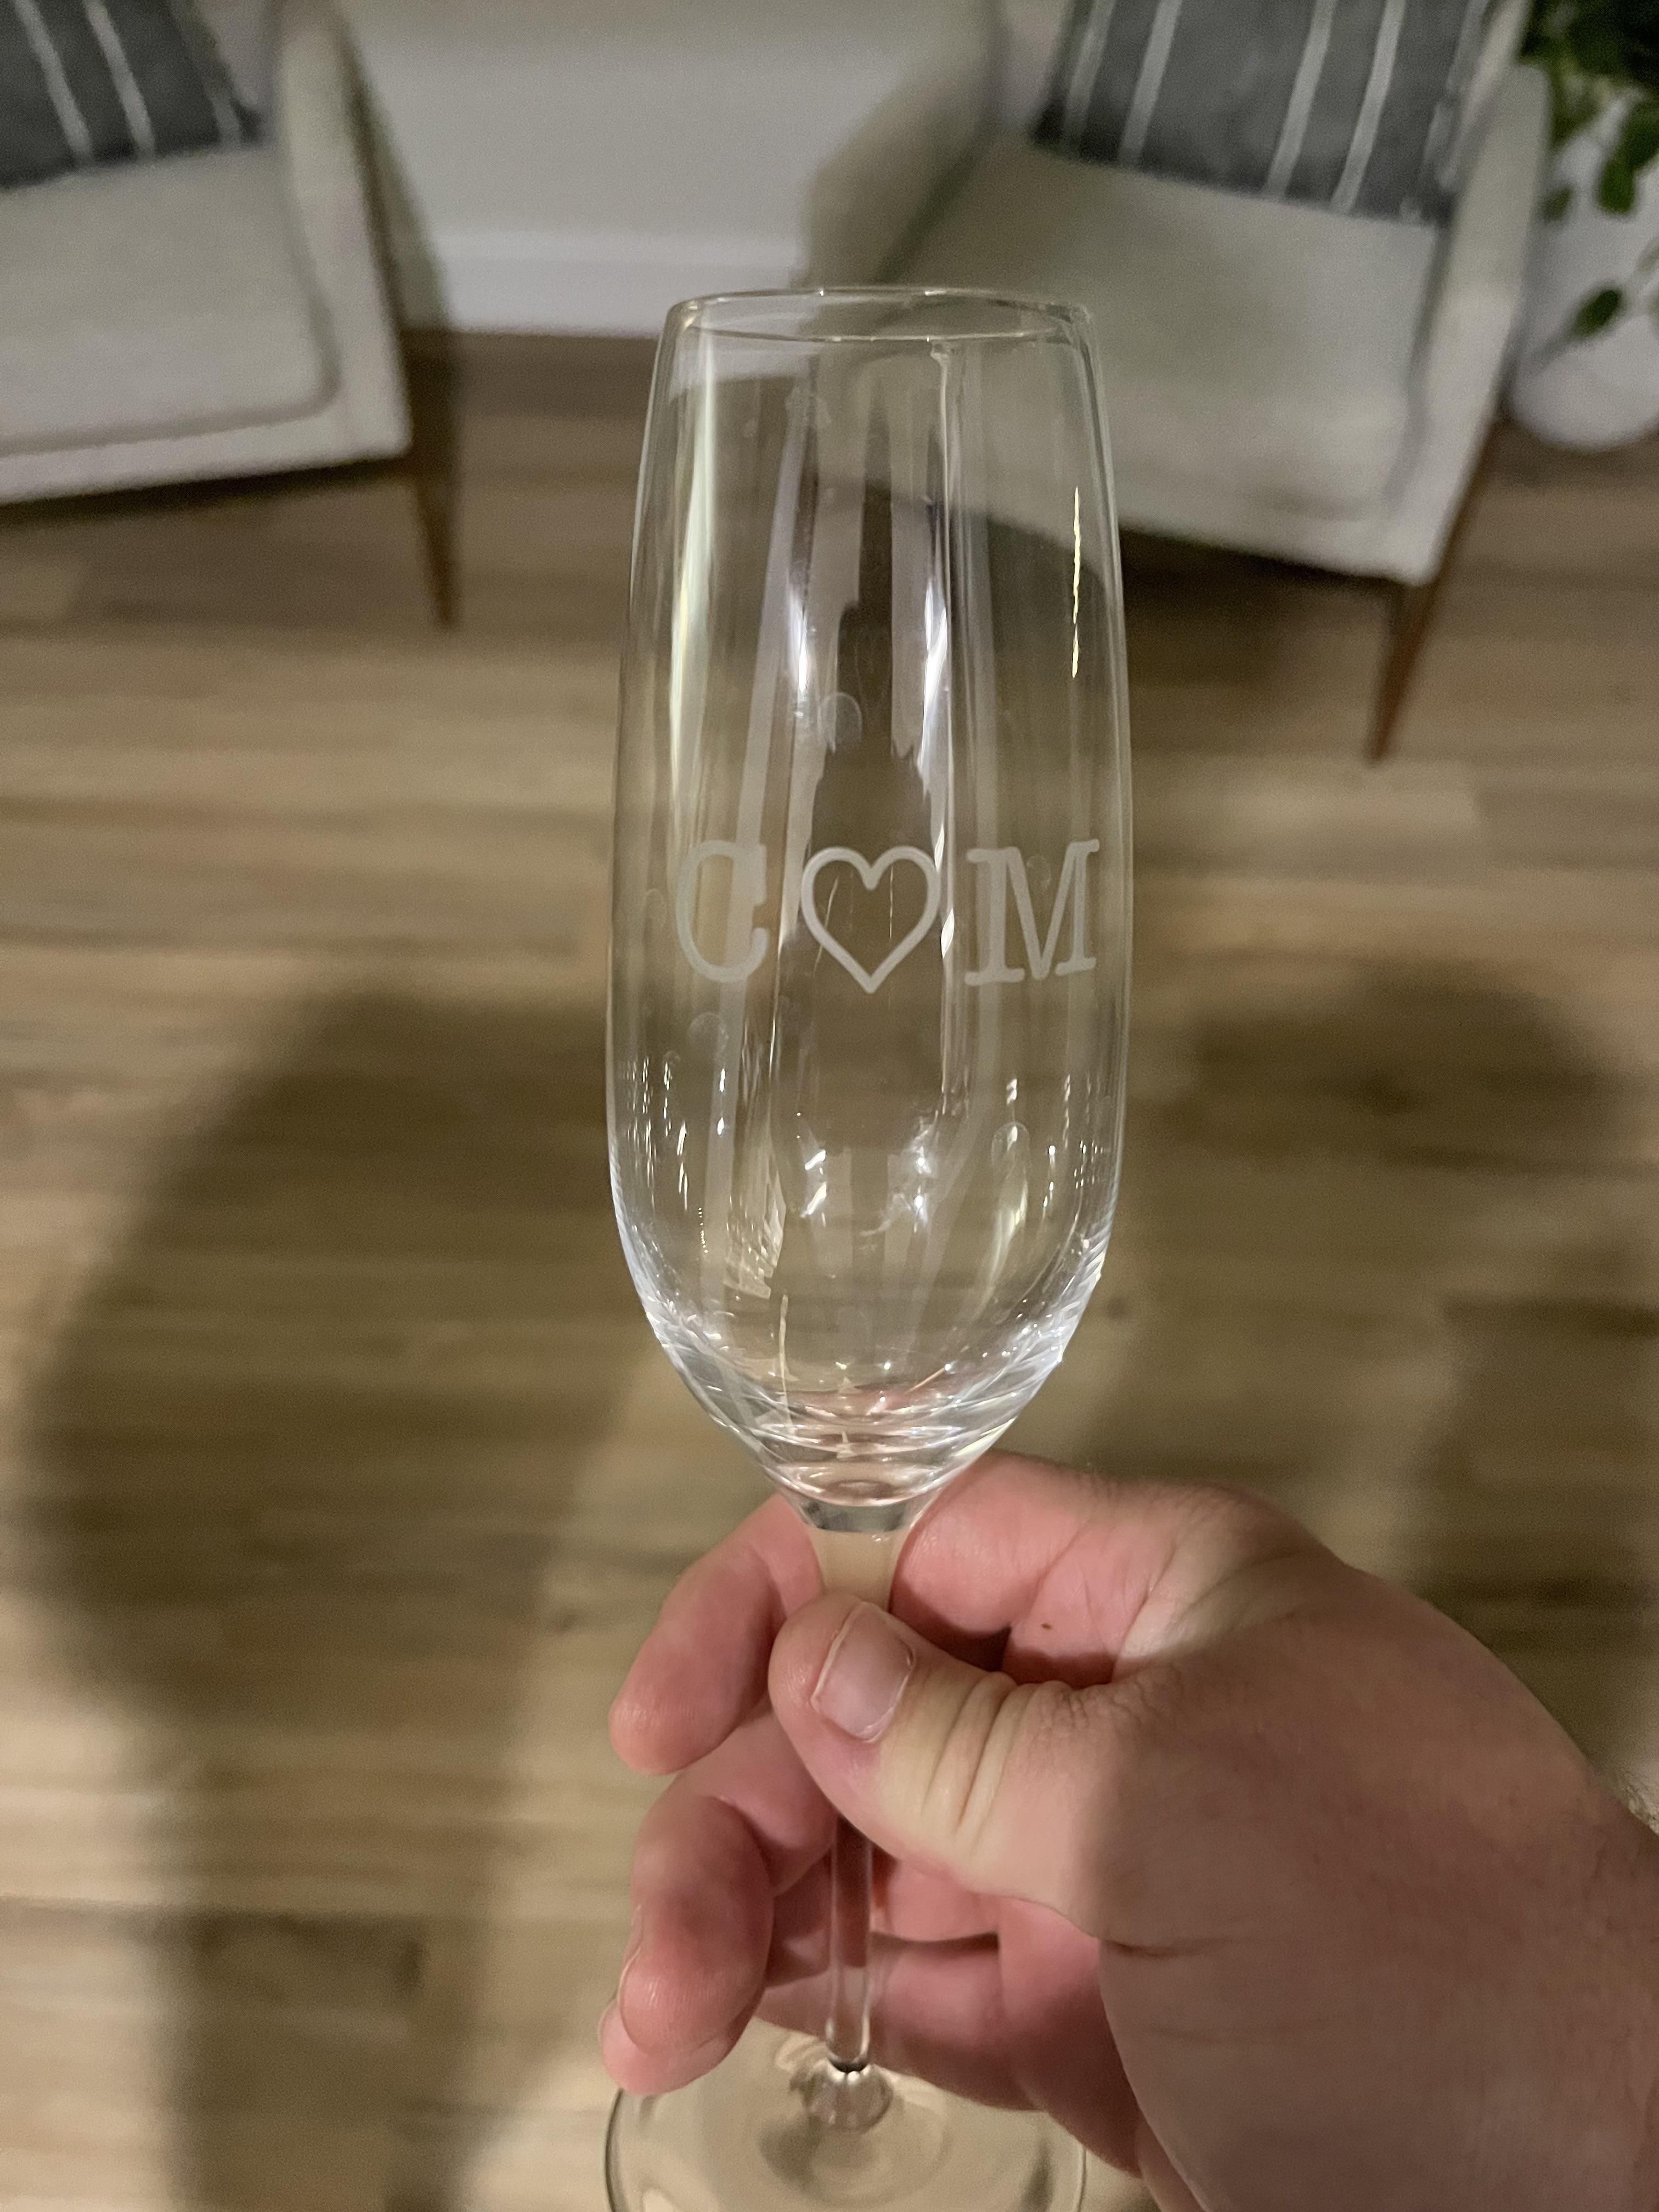 My mom gave me and my wife these wine glasses with our initials engraved.